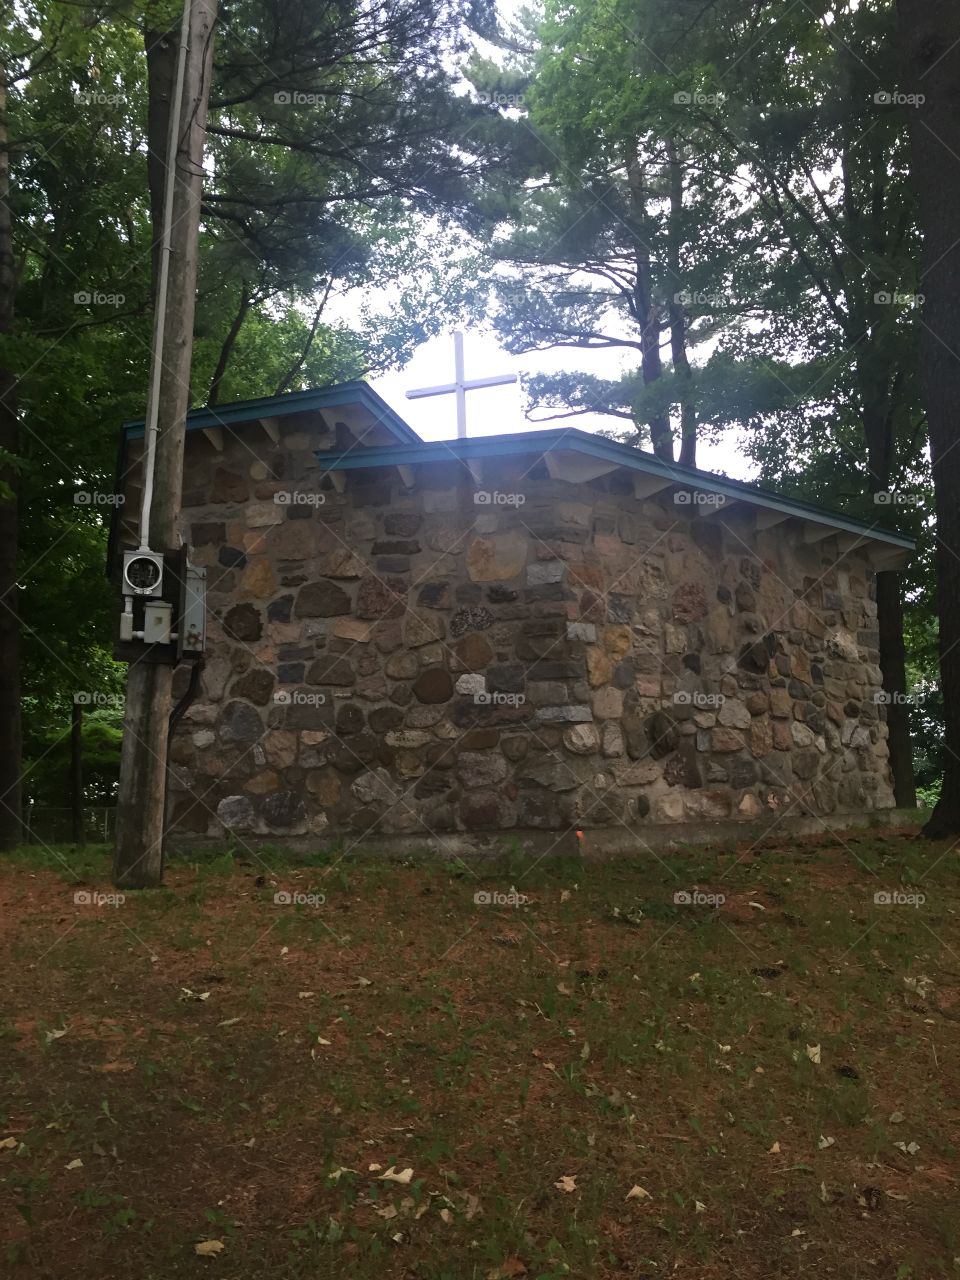 Building made of rocks with a cross en the roof